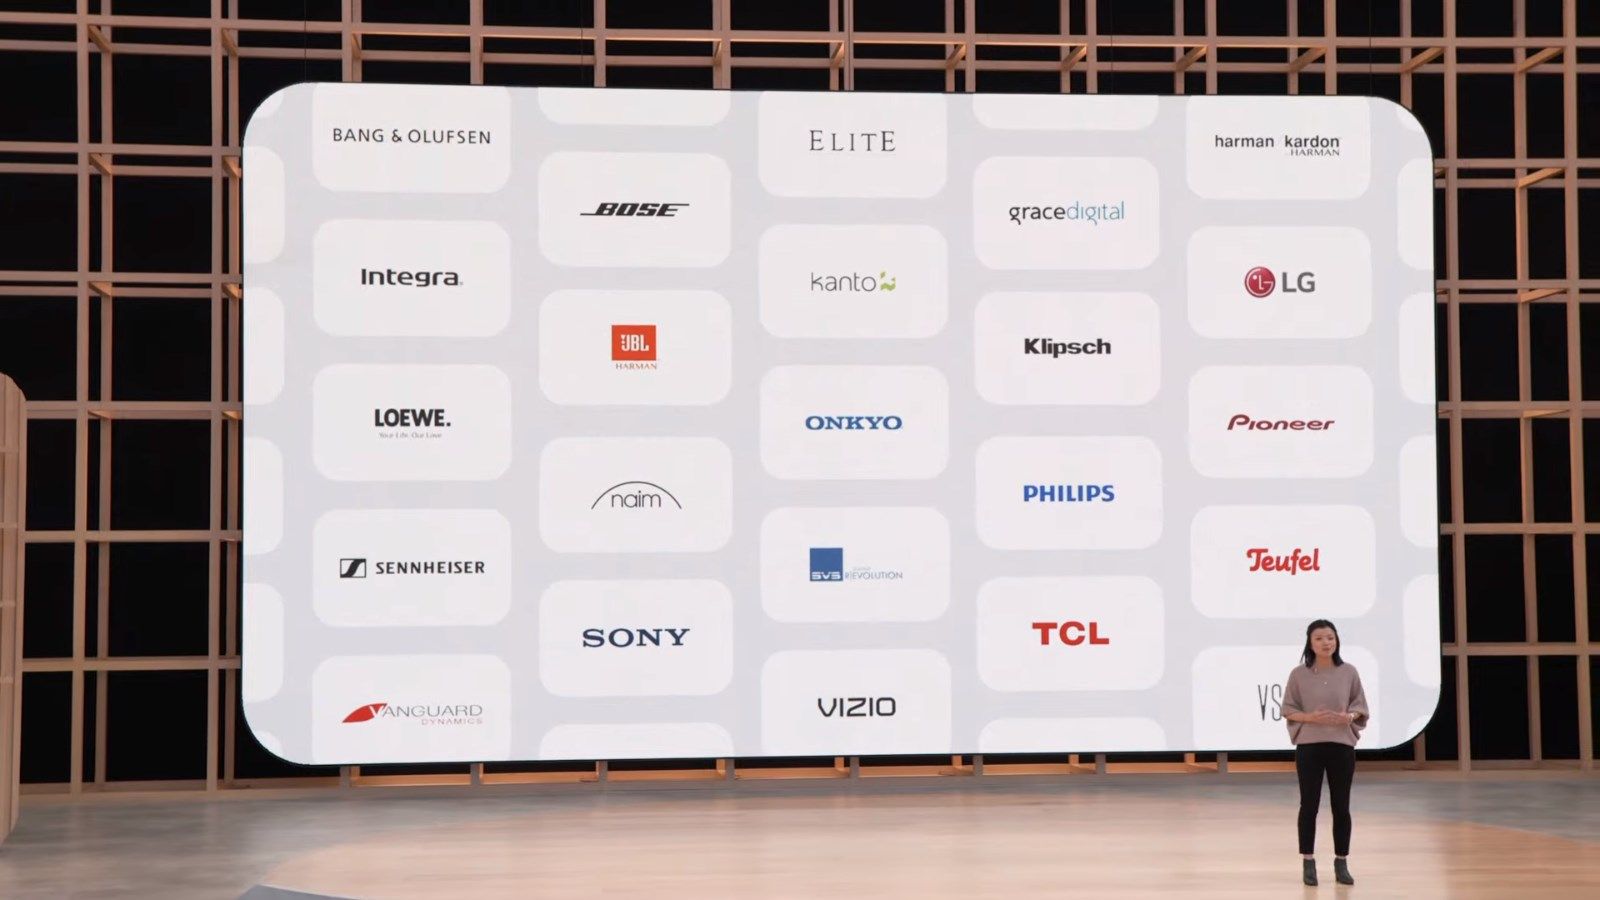 A list of companies with Google Chromecast features.